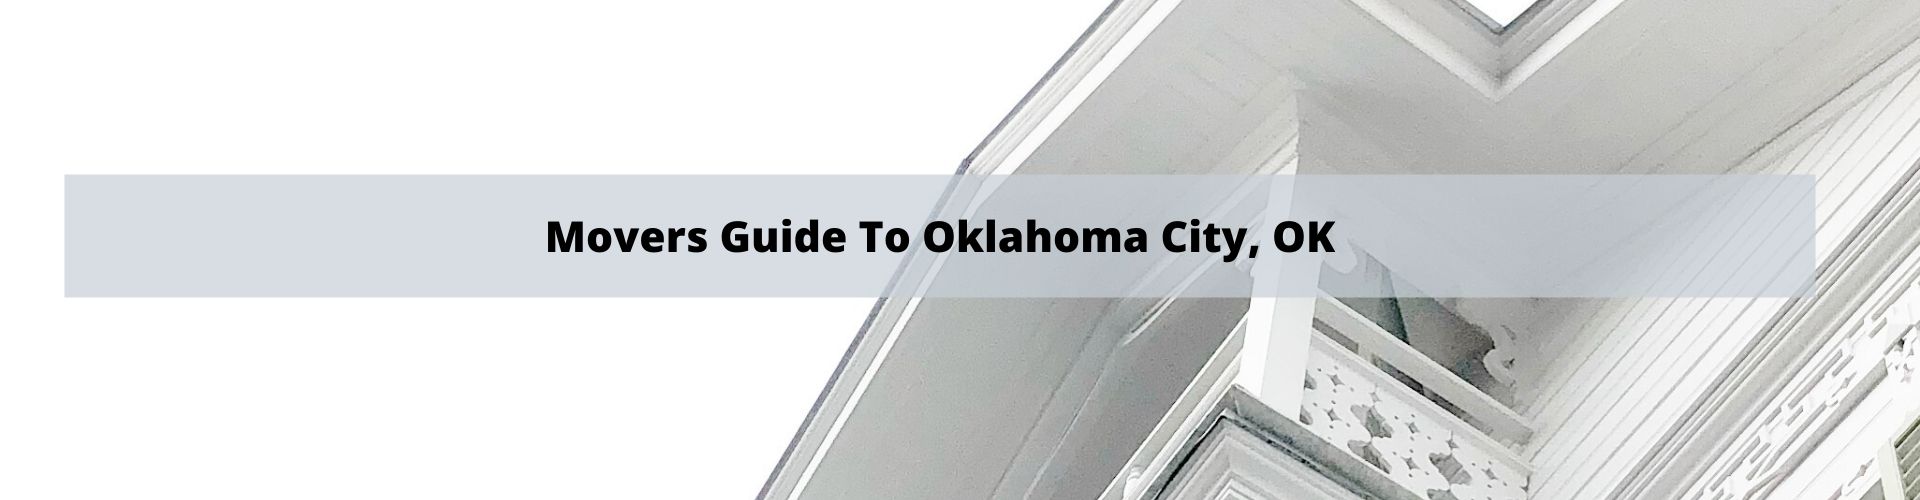 Movers guide to Oklahoma City